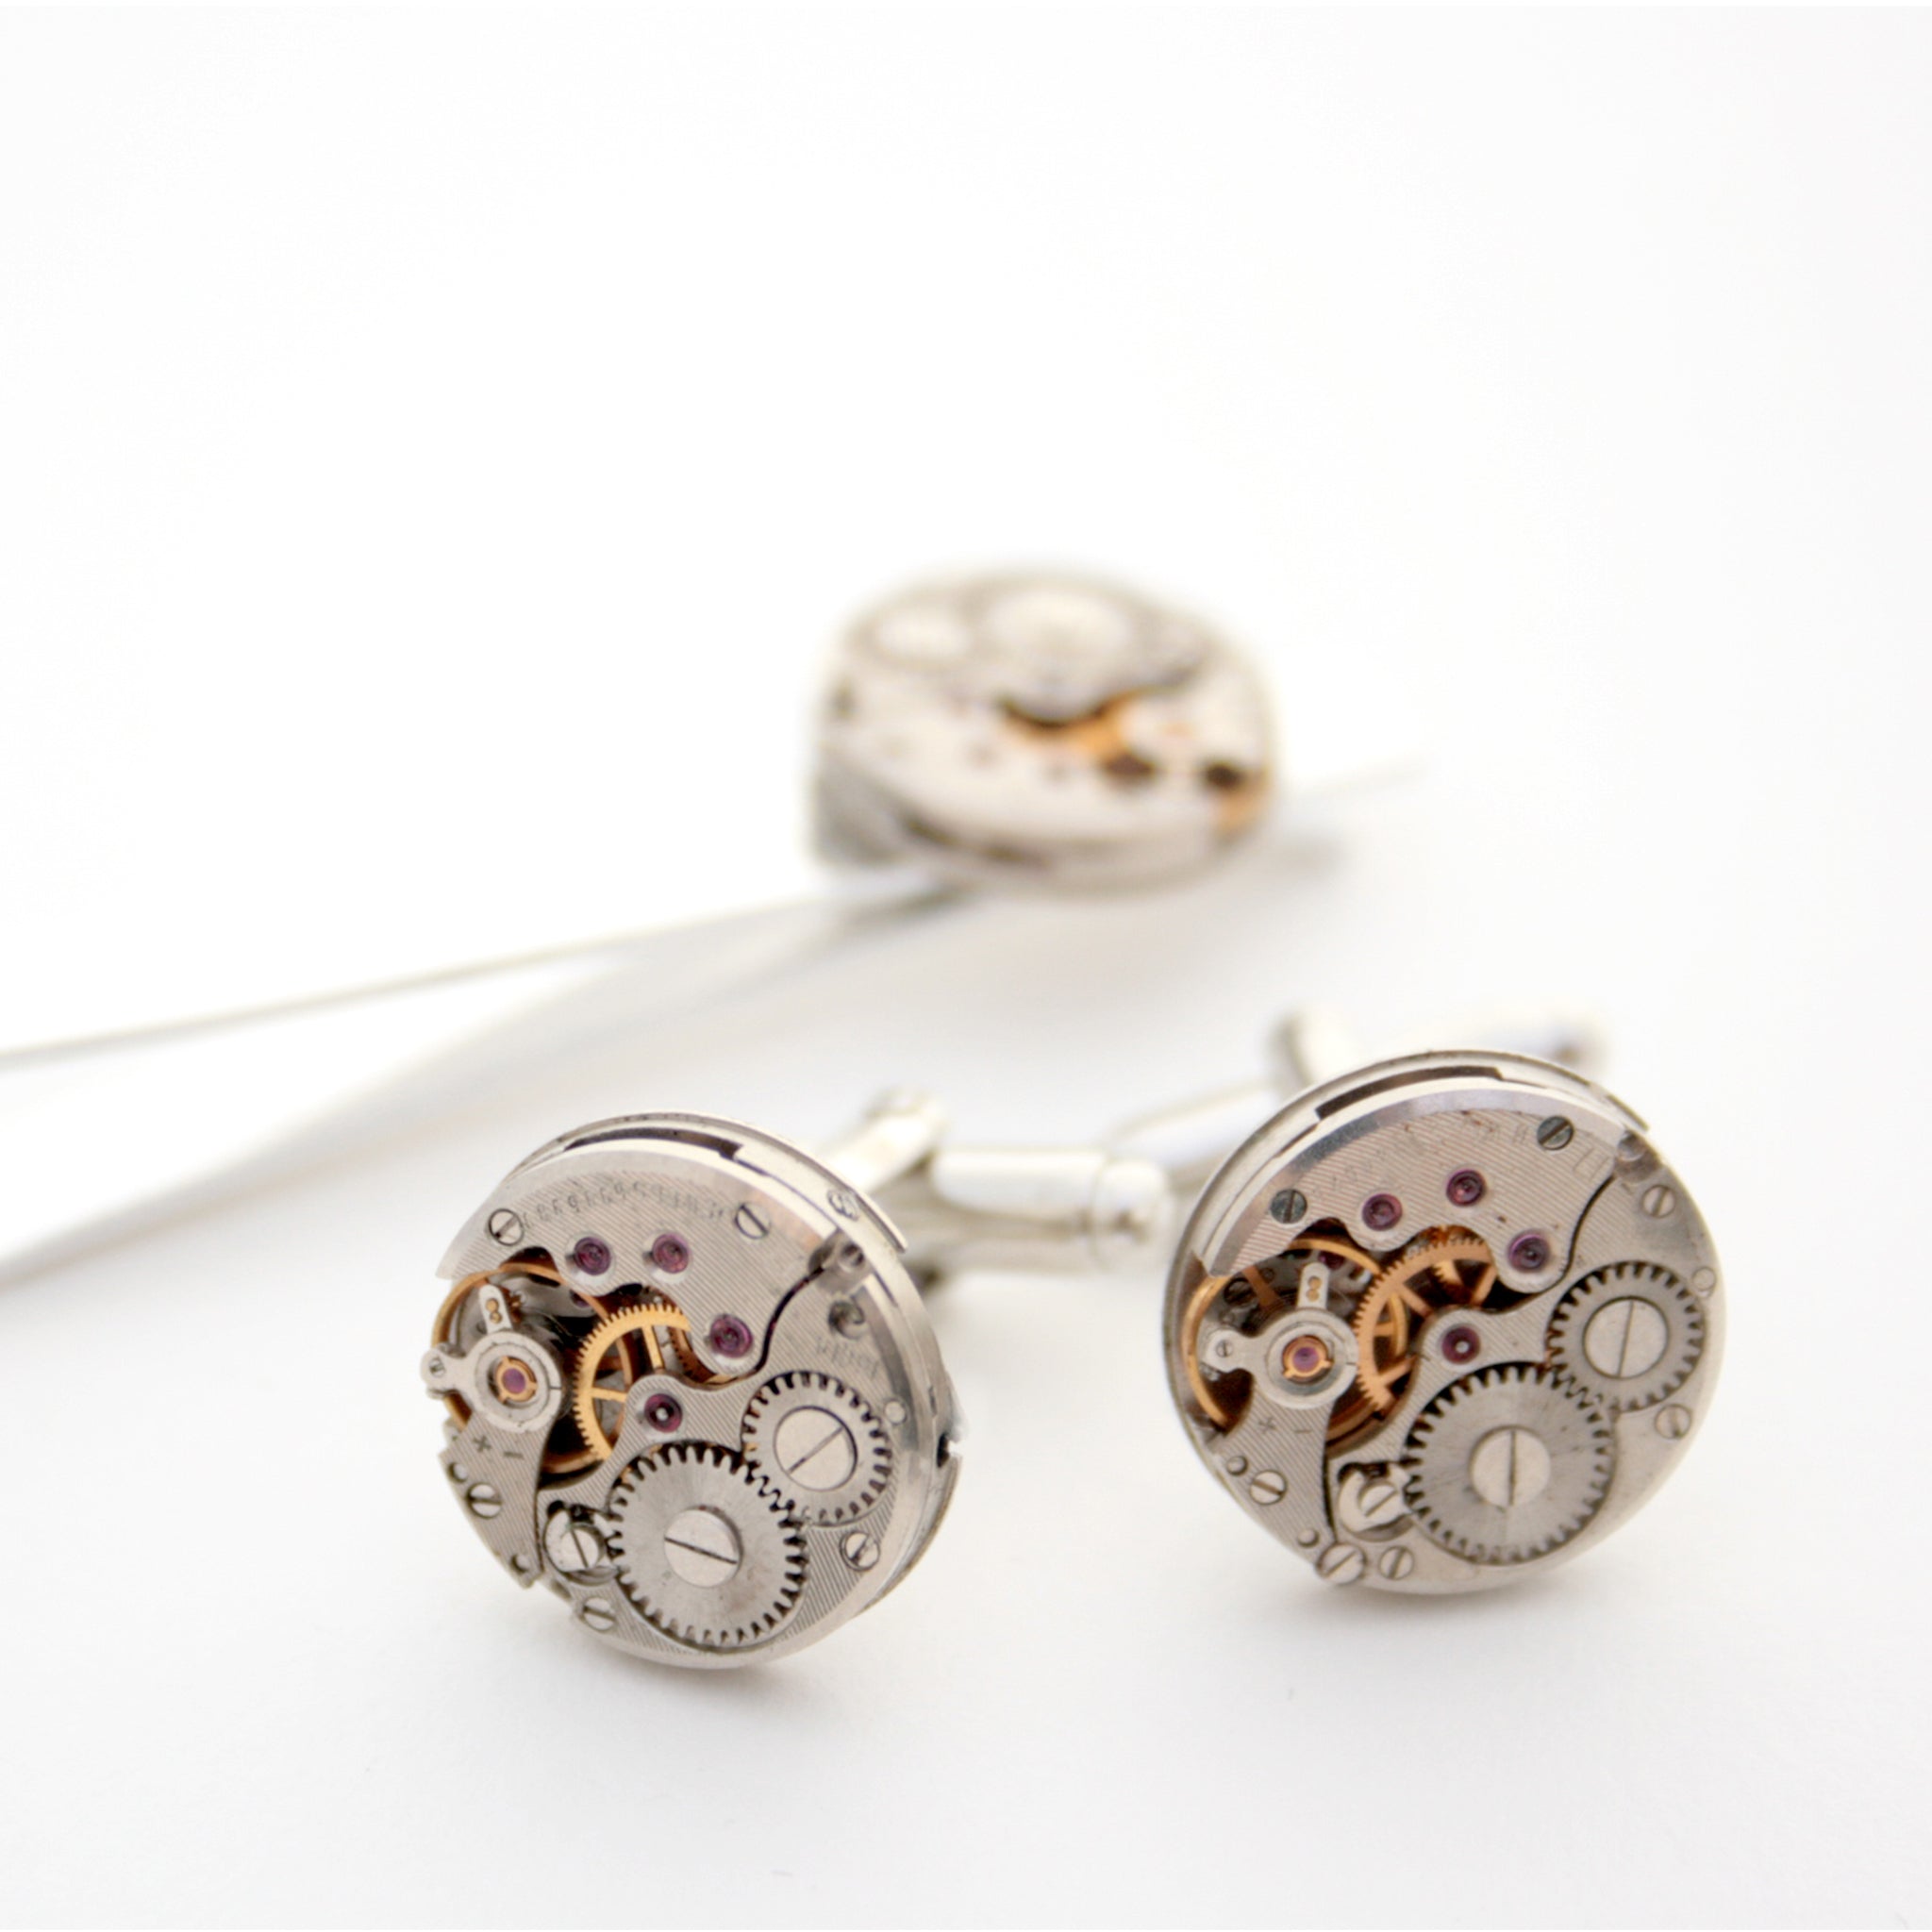 Tie Clip and Cufflinks with Steampunk Watch Movements